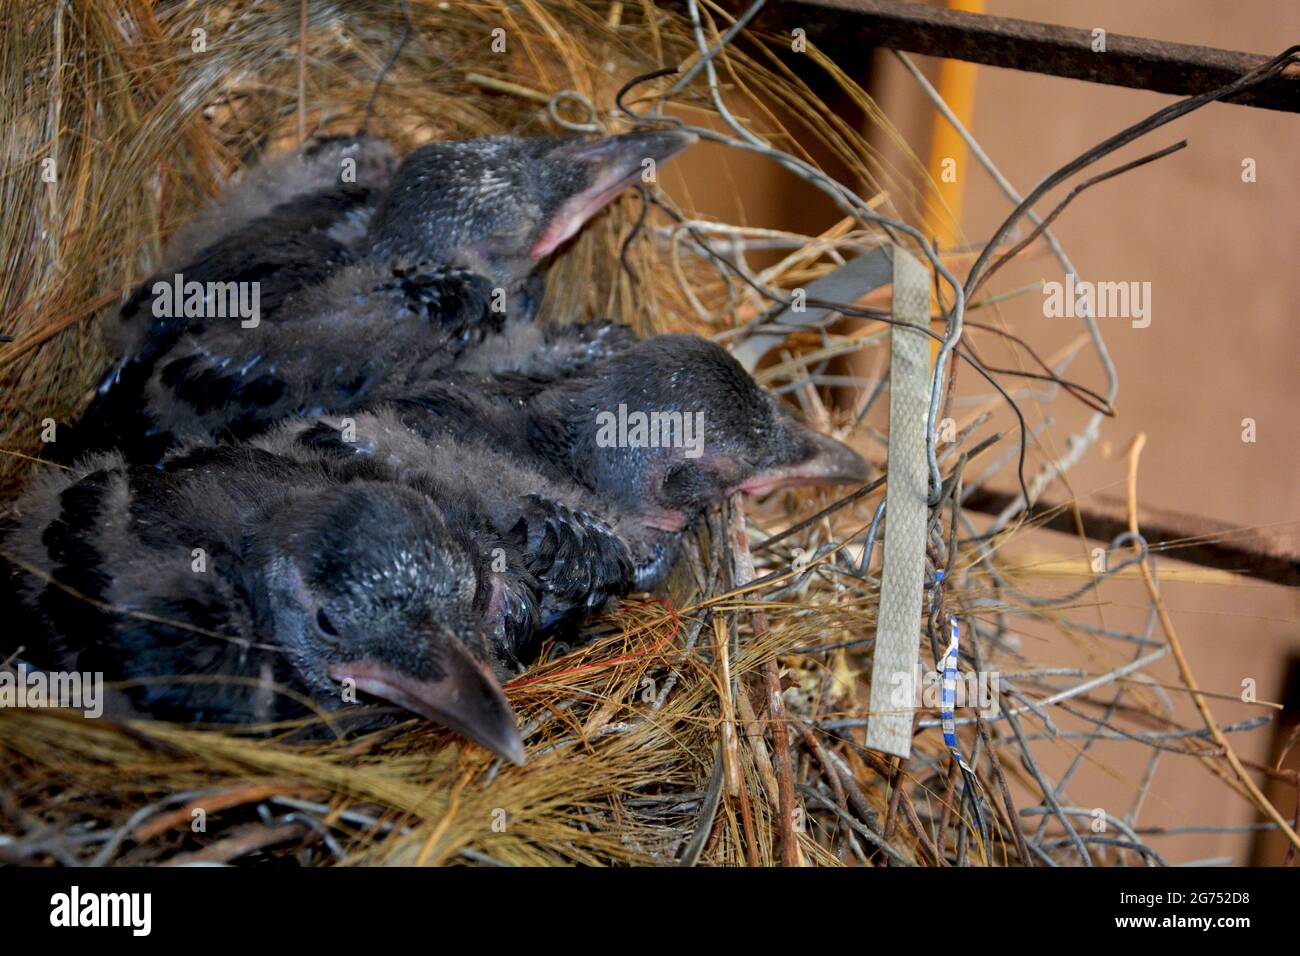 Close up of three new born Indian crows, Corvus splendens  hatched in straw nest, selective focusing Stock Photo